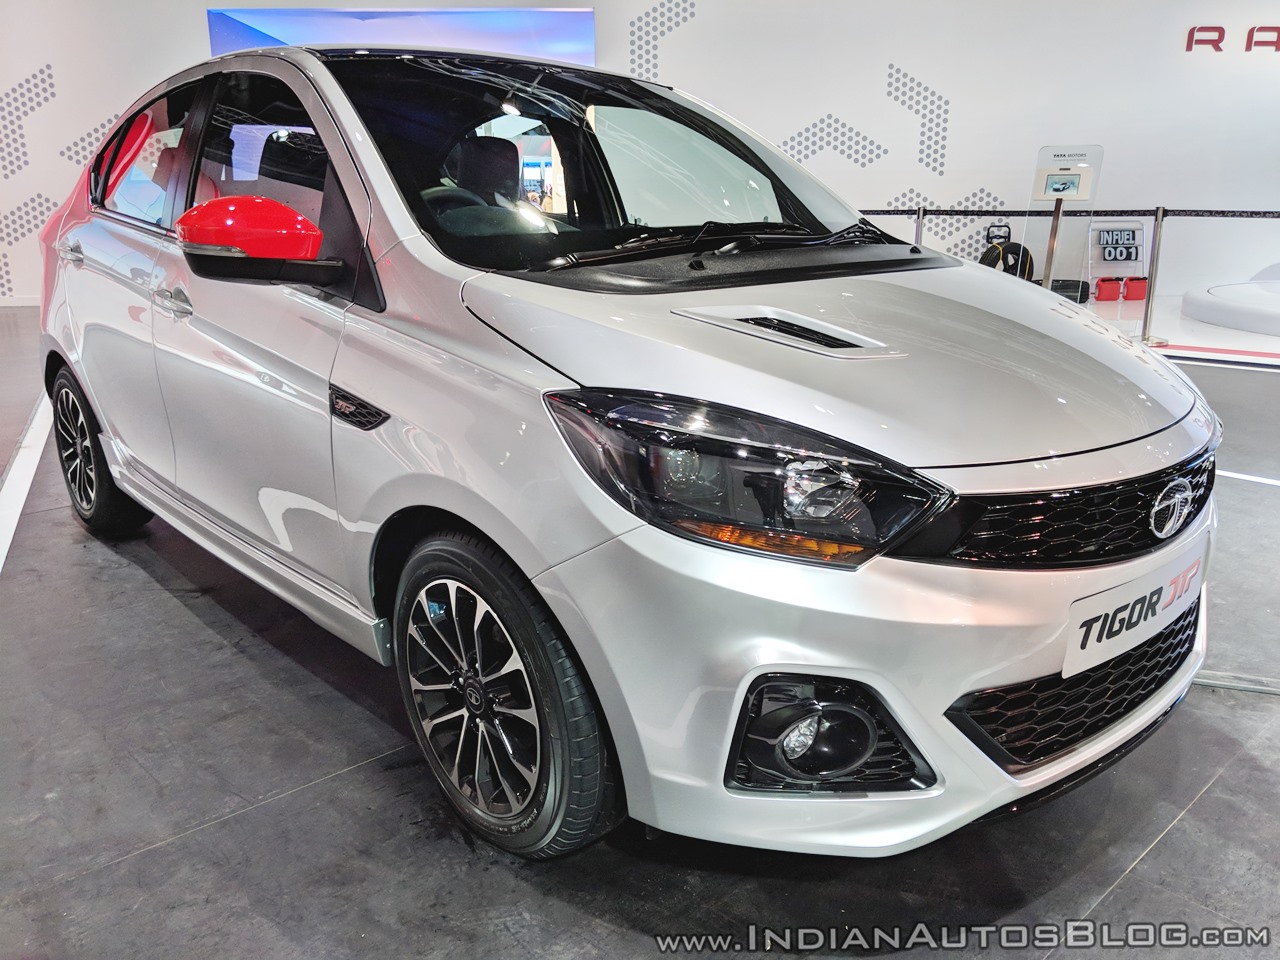 Upcoming Tata Cars In India Tiago Jtp To Harrier Based H7x Suv